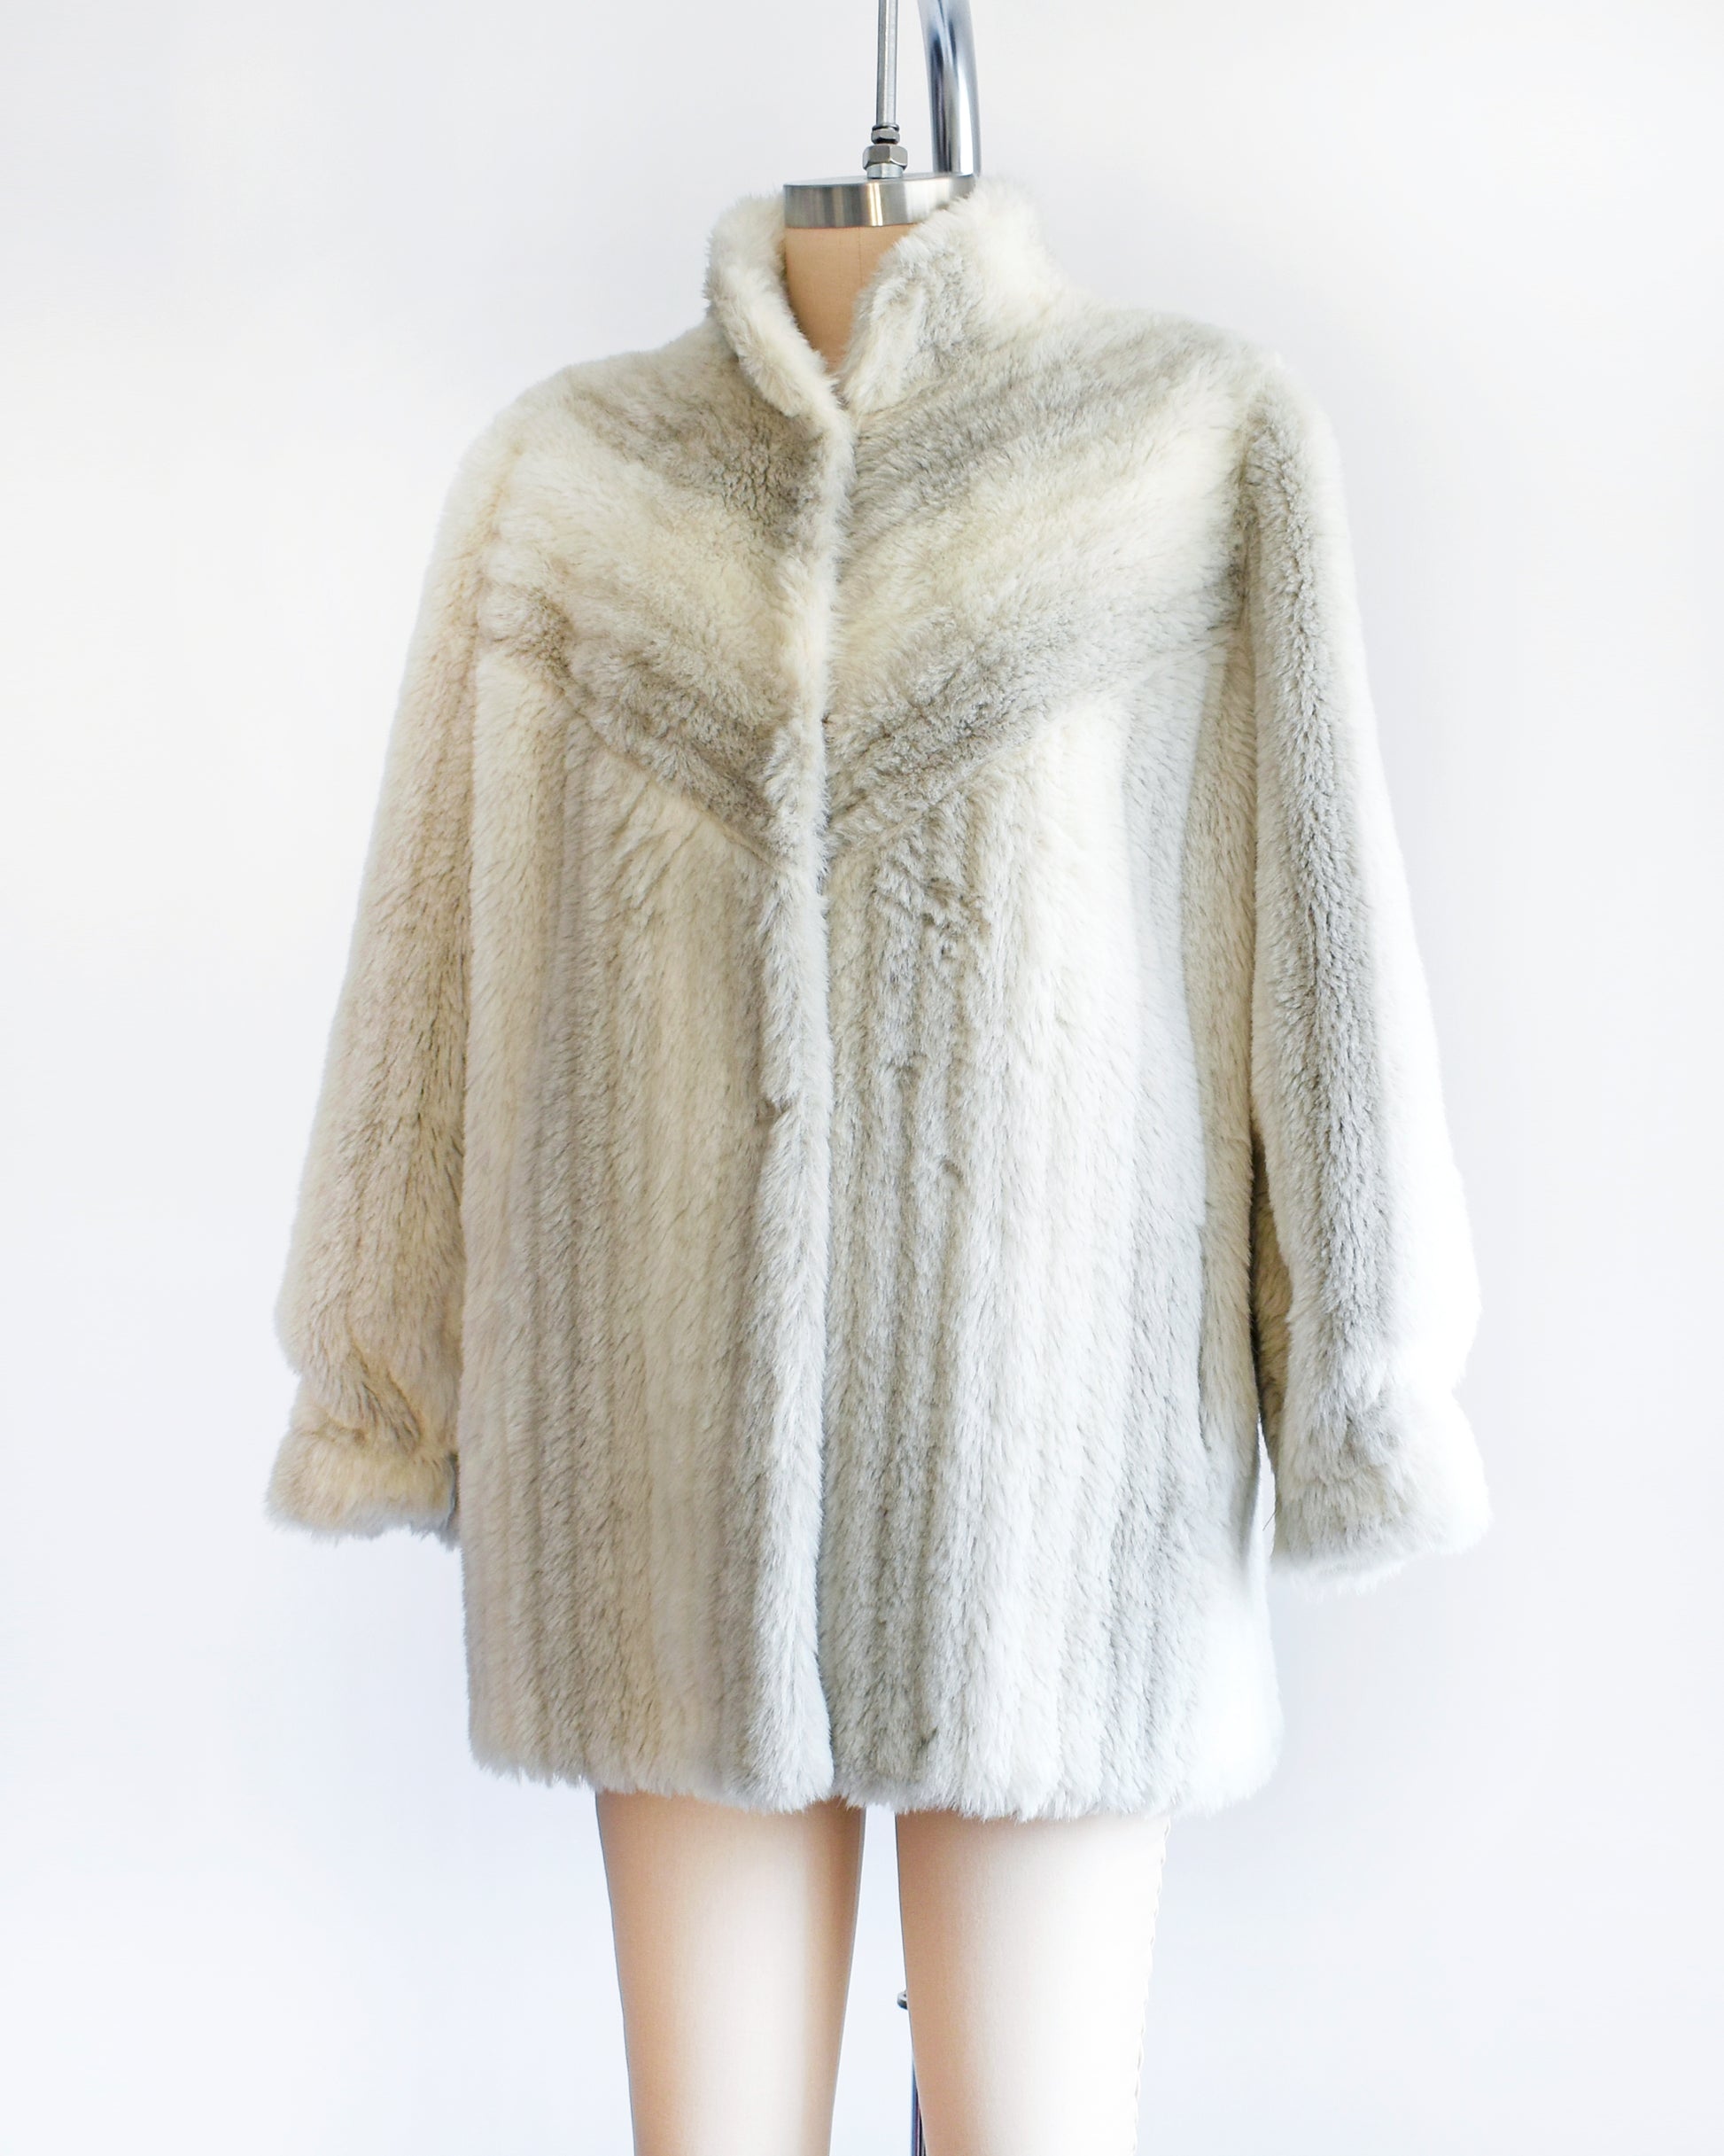 Side front view of a vintage 70s/80s faux fur coat is made from a plush white faux fur with gray stripes, and features a stand-up collar with slightly puffed shoulders.